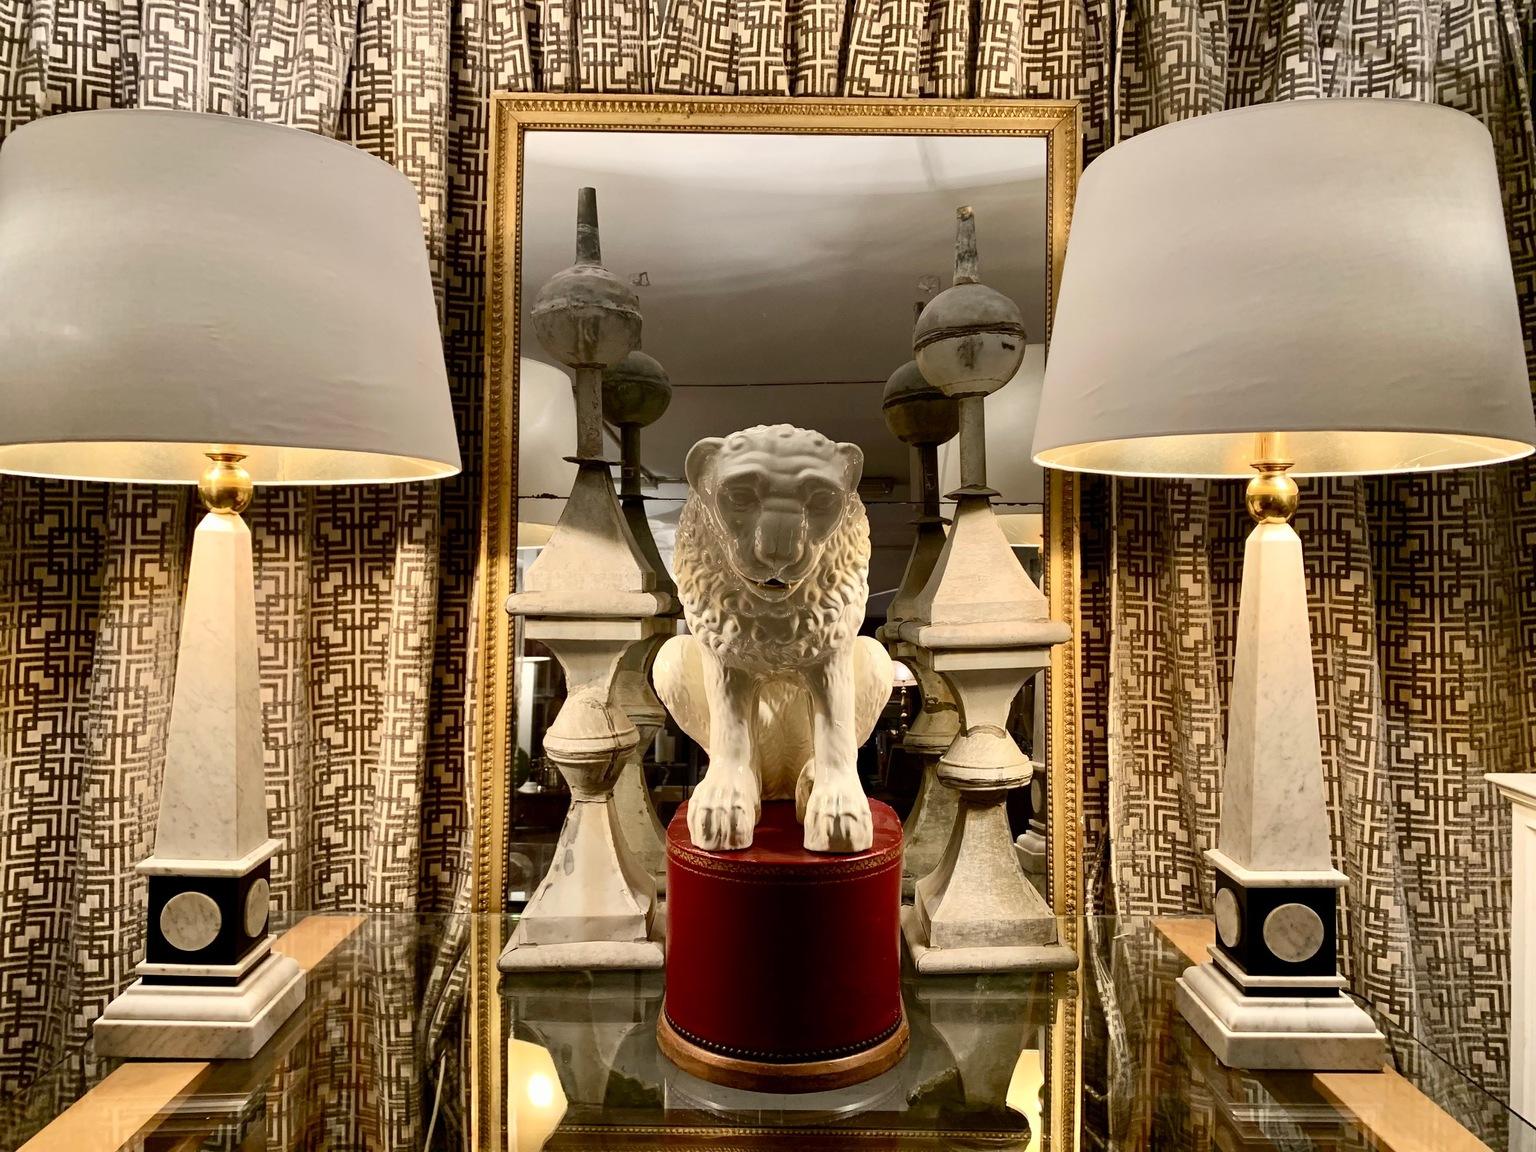 Pair of large obelisk-shaped lamps, in marble and black stone, each lamp has three bulbs, two on the sides and the other directed at the ceiling, coming out of a gilded brass column with a ball-shaped base. Measurements are for lamps only. The